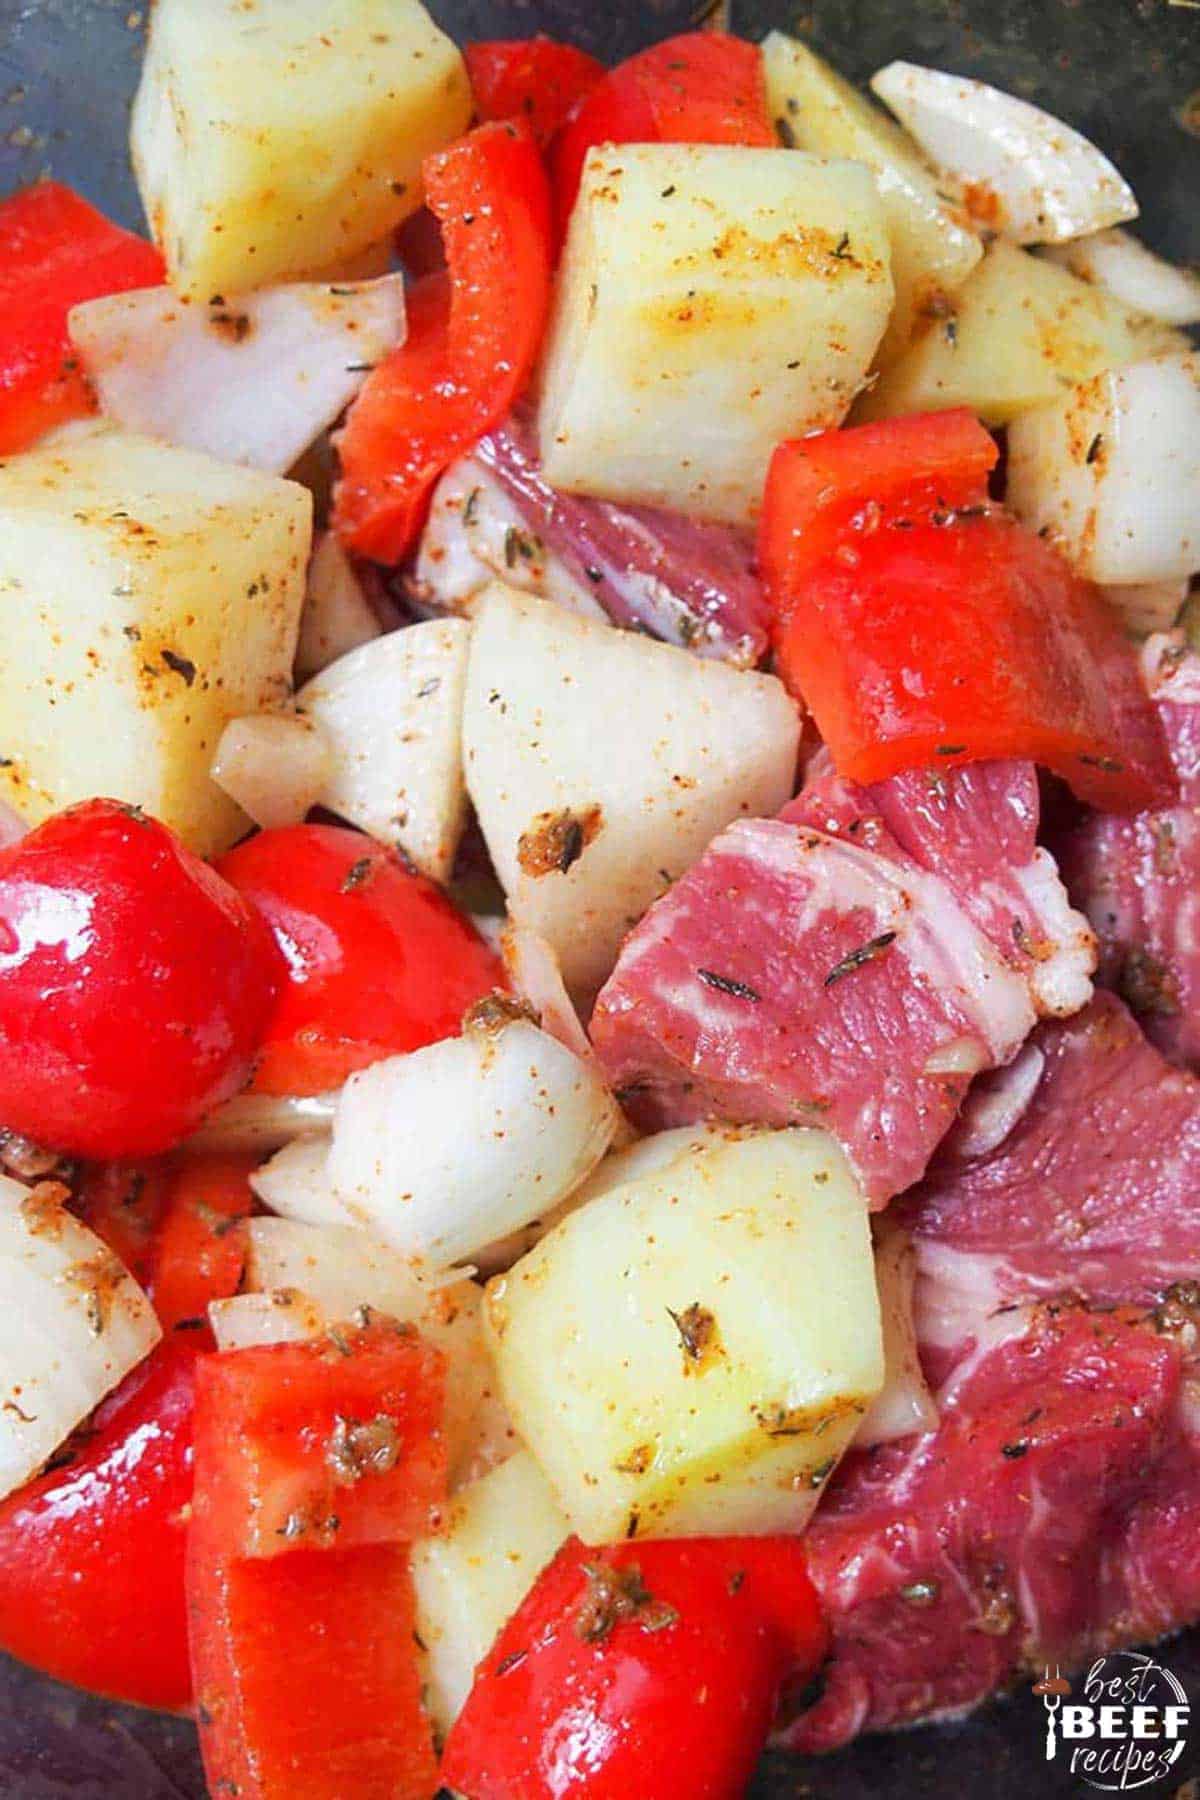 Diced steak, potatoes, peppers, and onions up close coated in oil